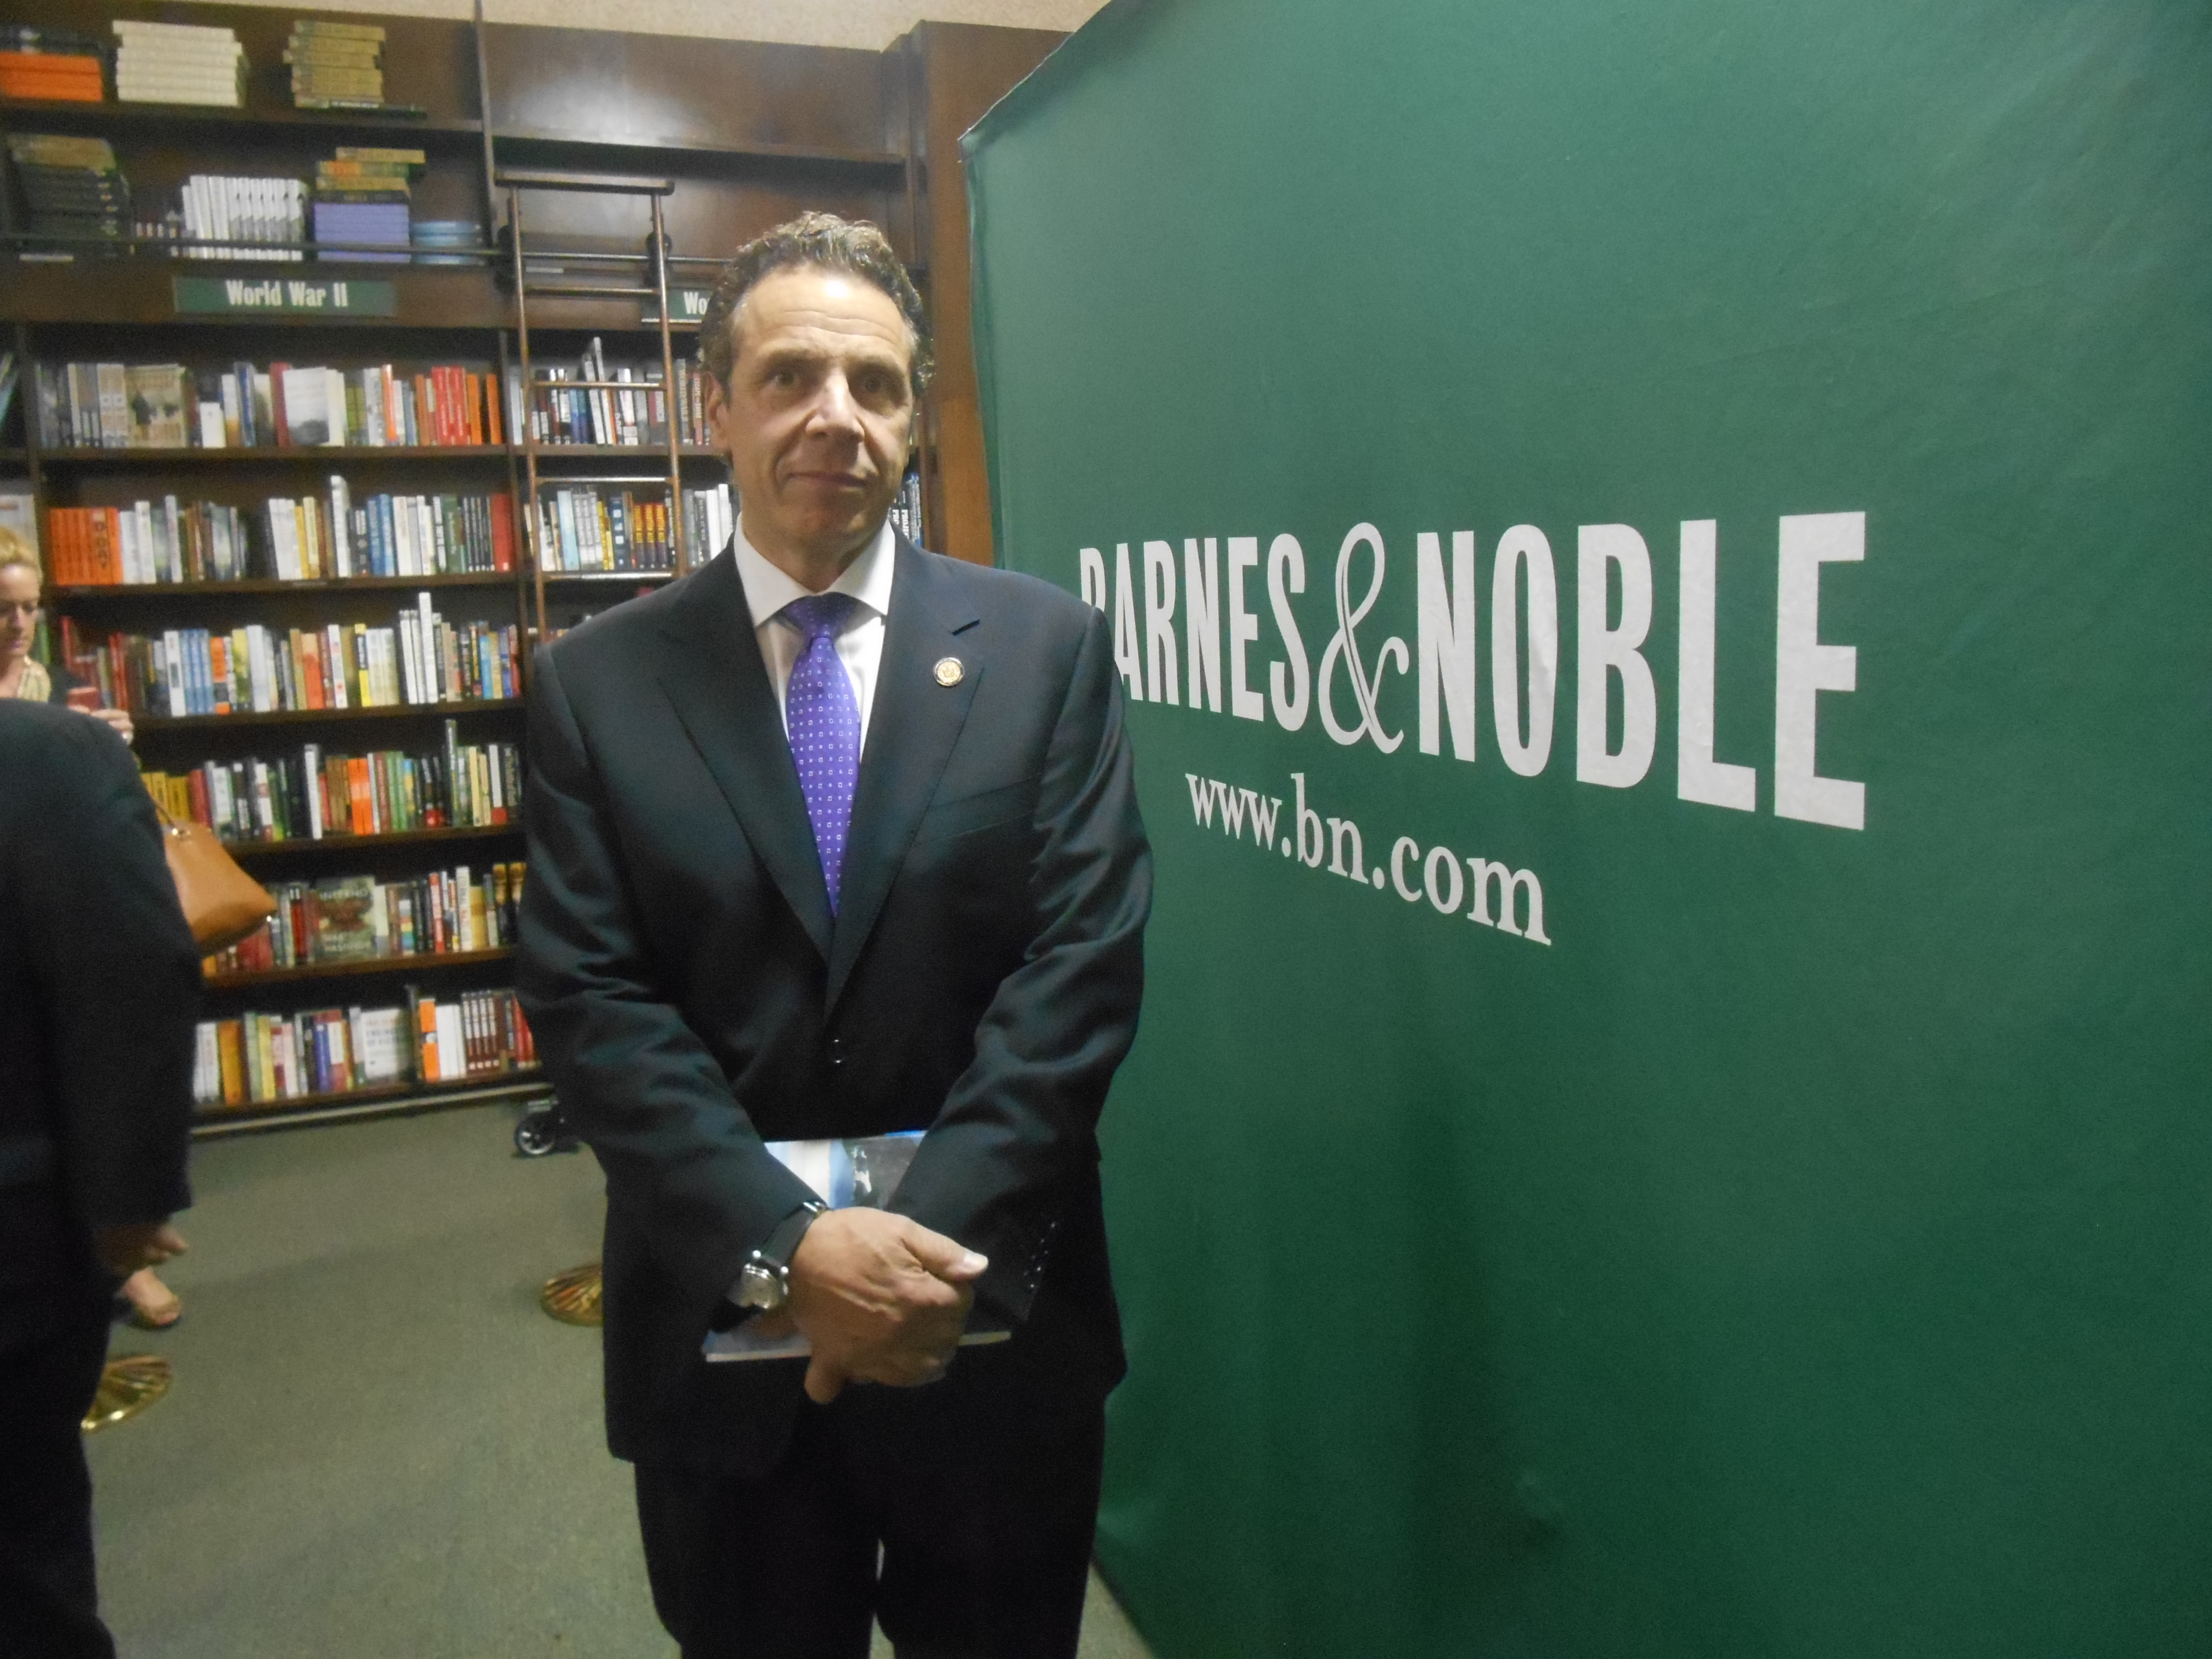 Gov. Andrew Cuomo at his book signing. (Photo: Ross Barkan)